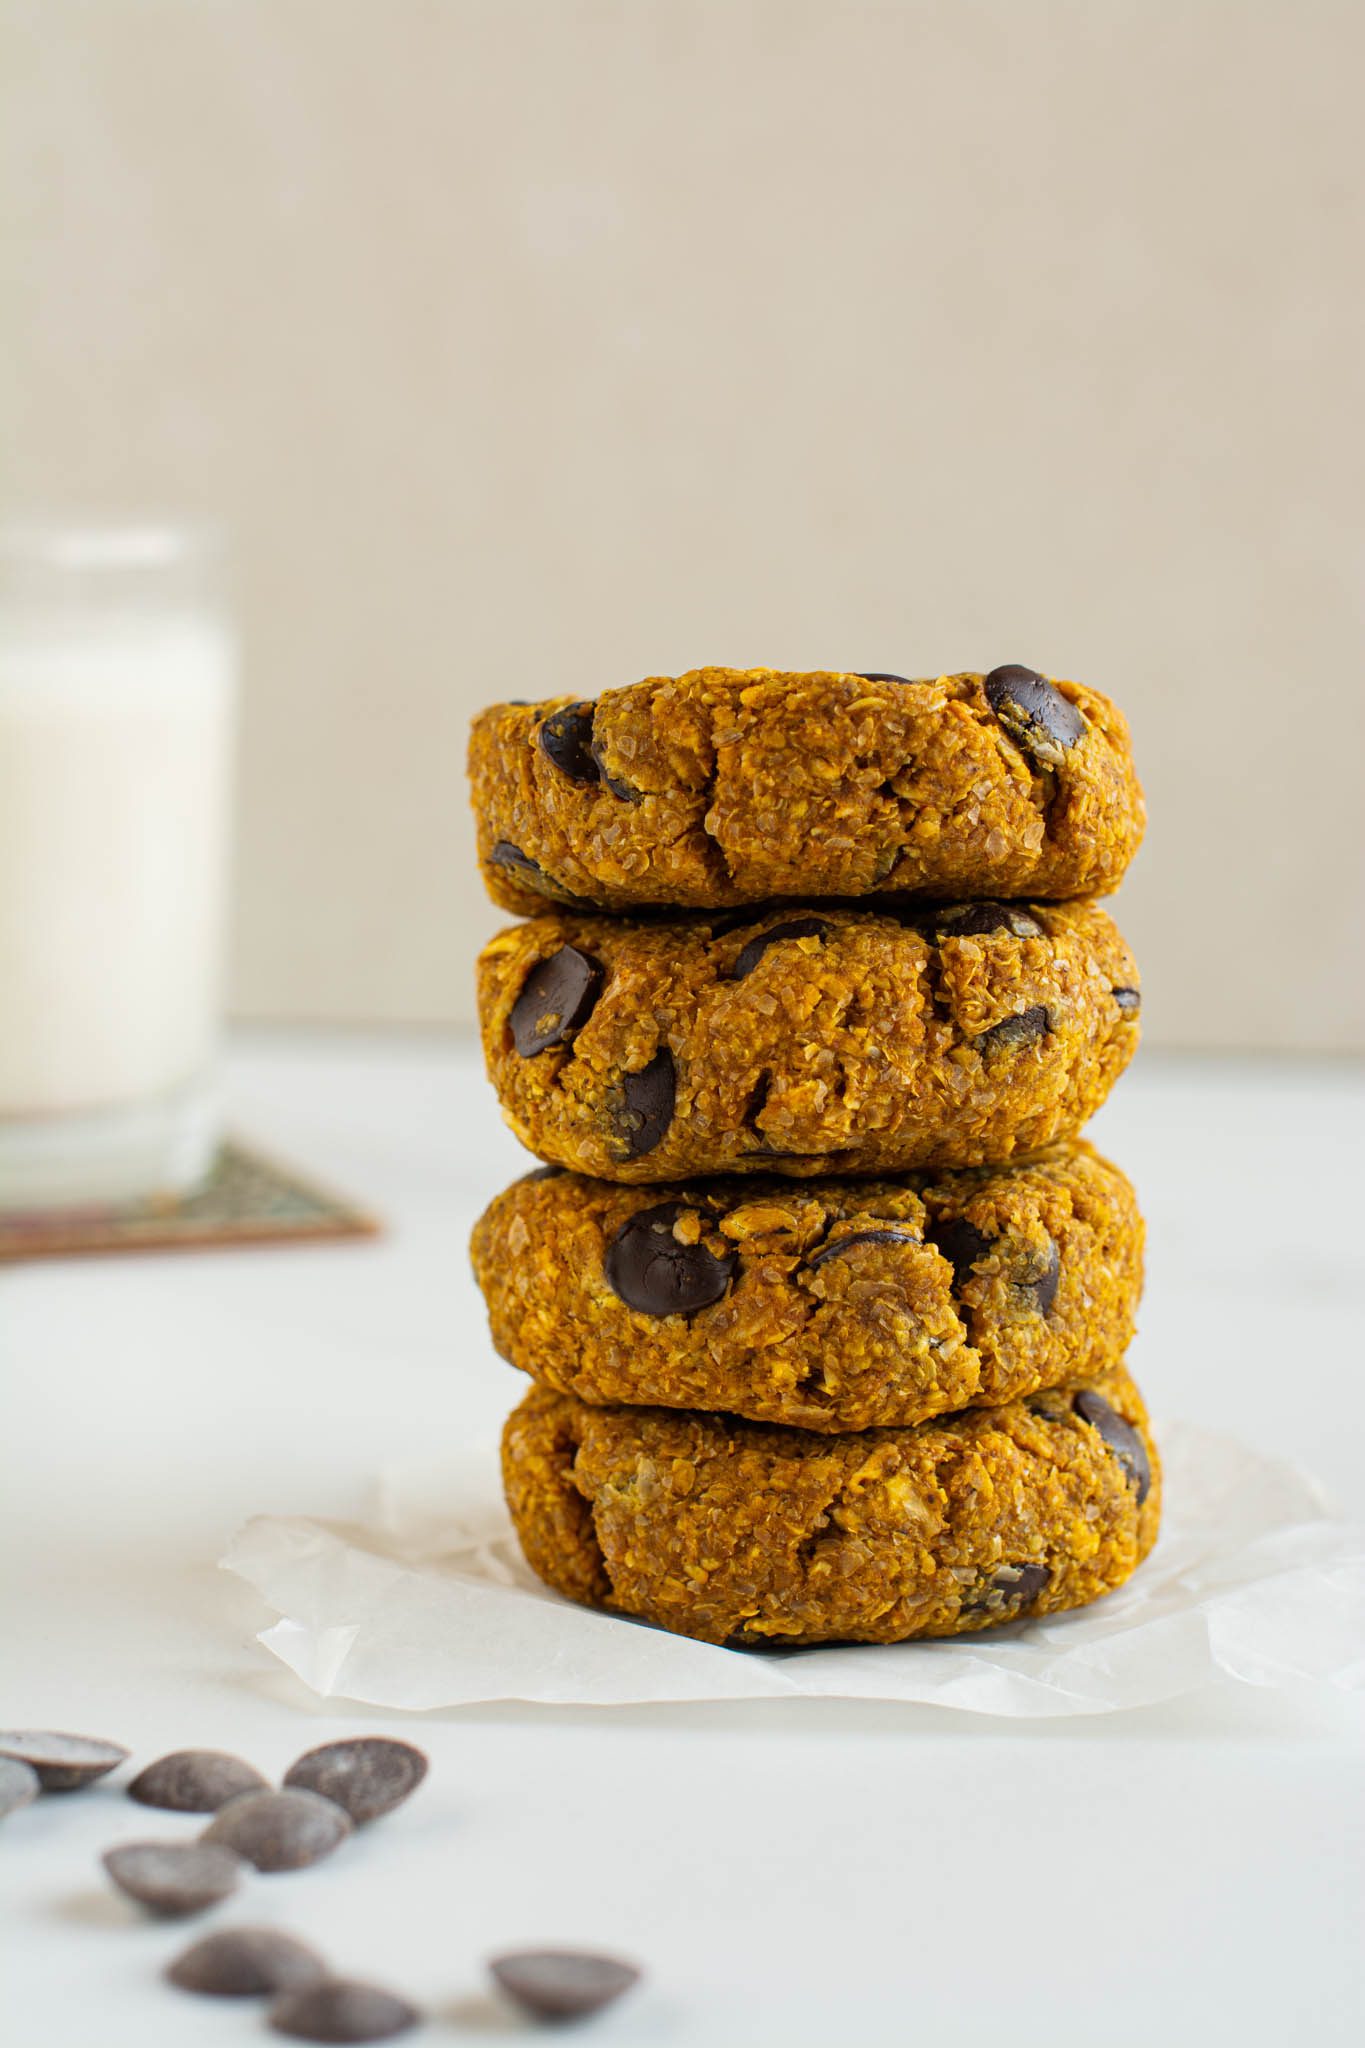 Learn how to make easy vegan pumpkin chocolate chip cookies that are extra fibrous and super satiating. They are excellent with a cup of tea or coffee for breakfast, snack, or as a healthy dessert. 